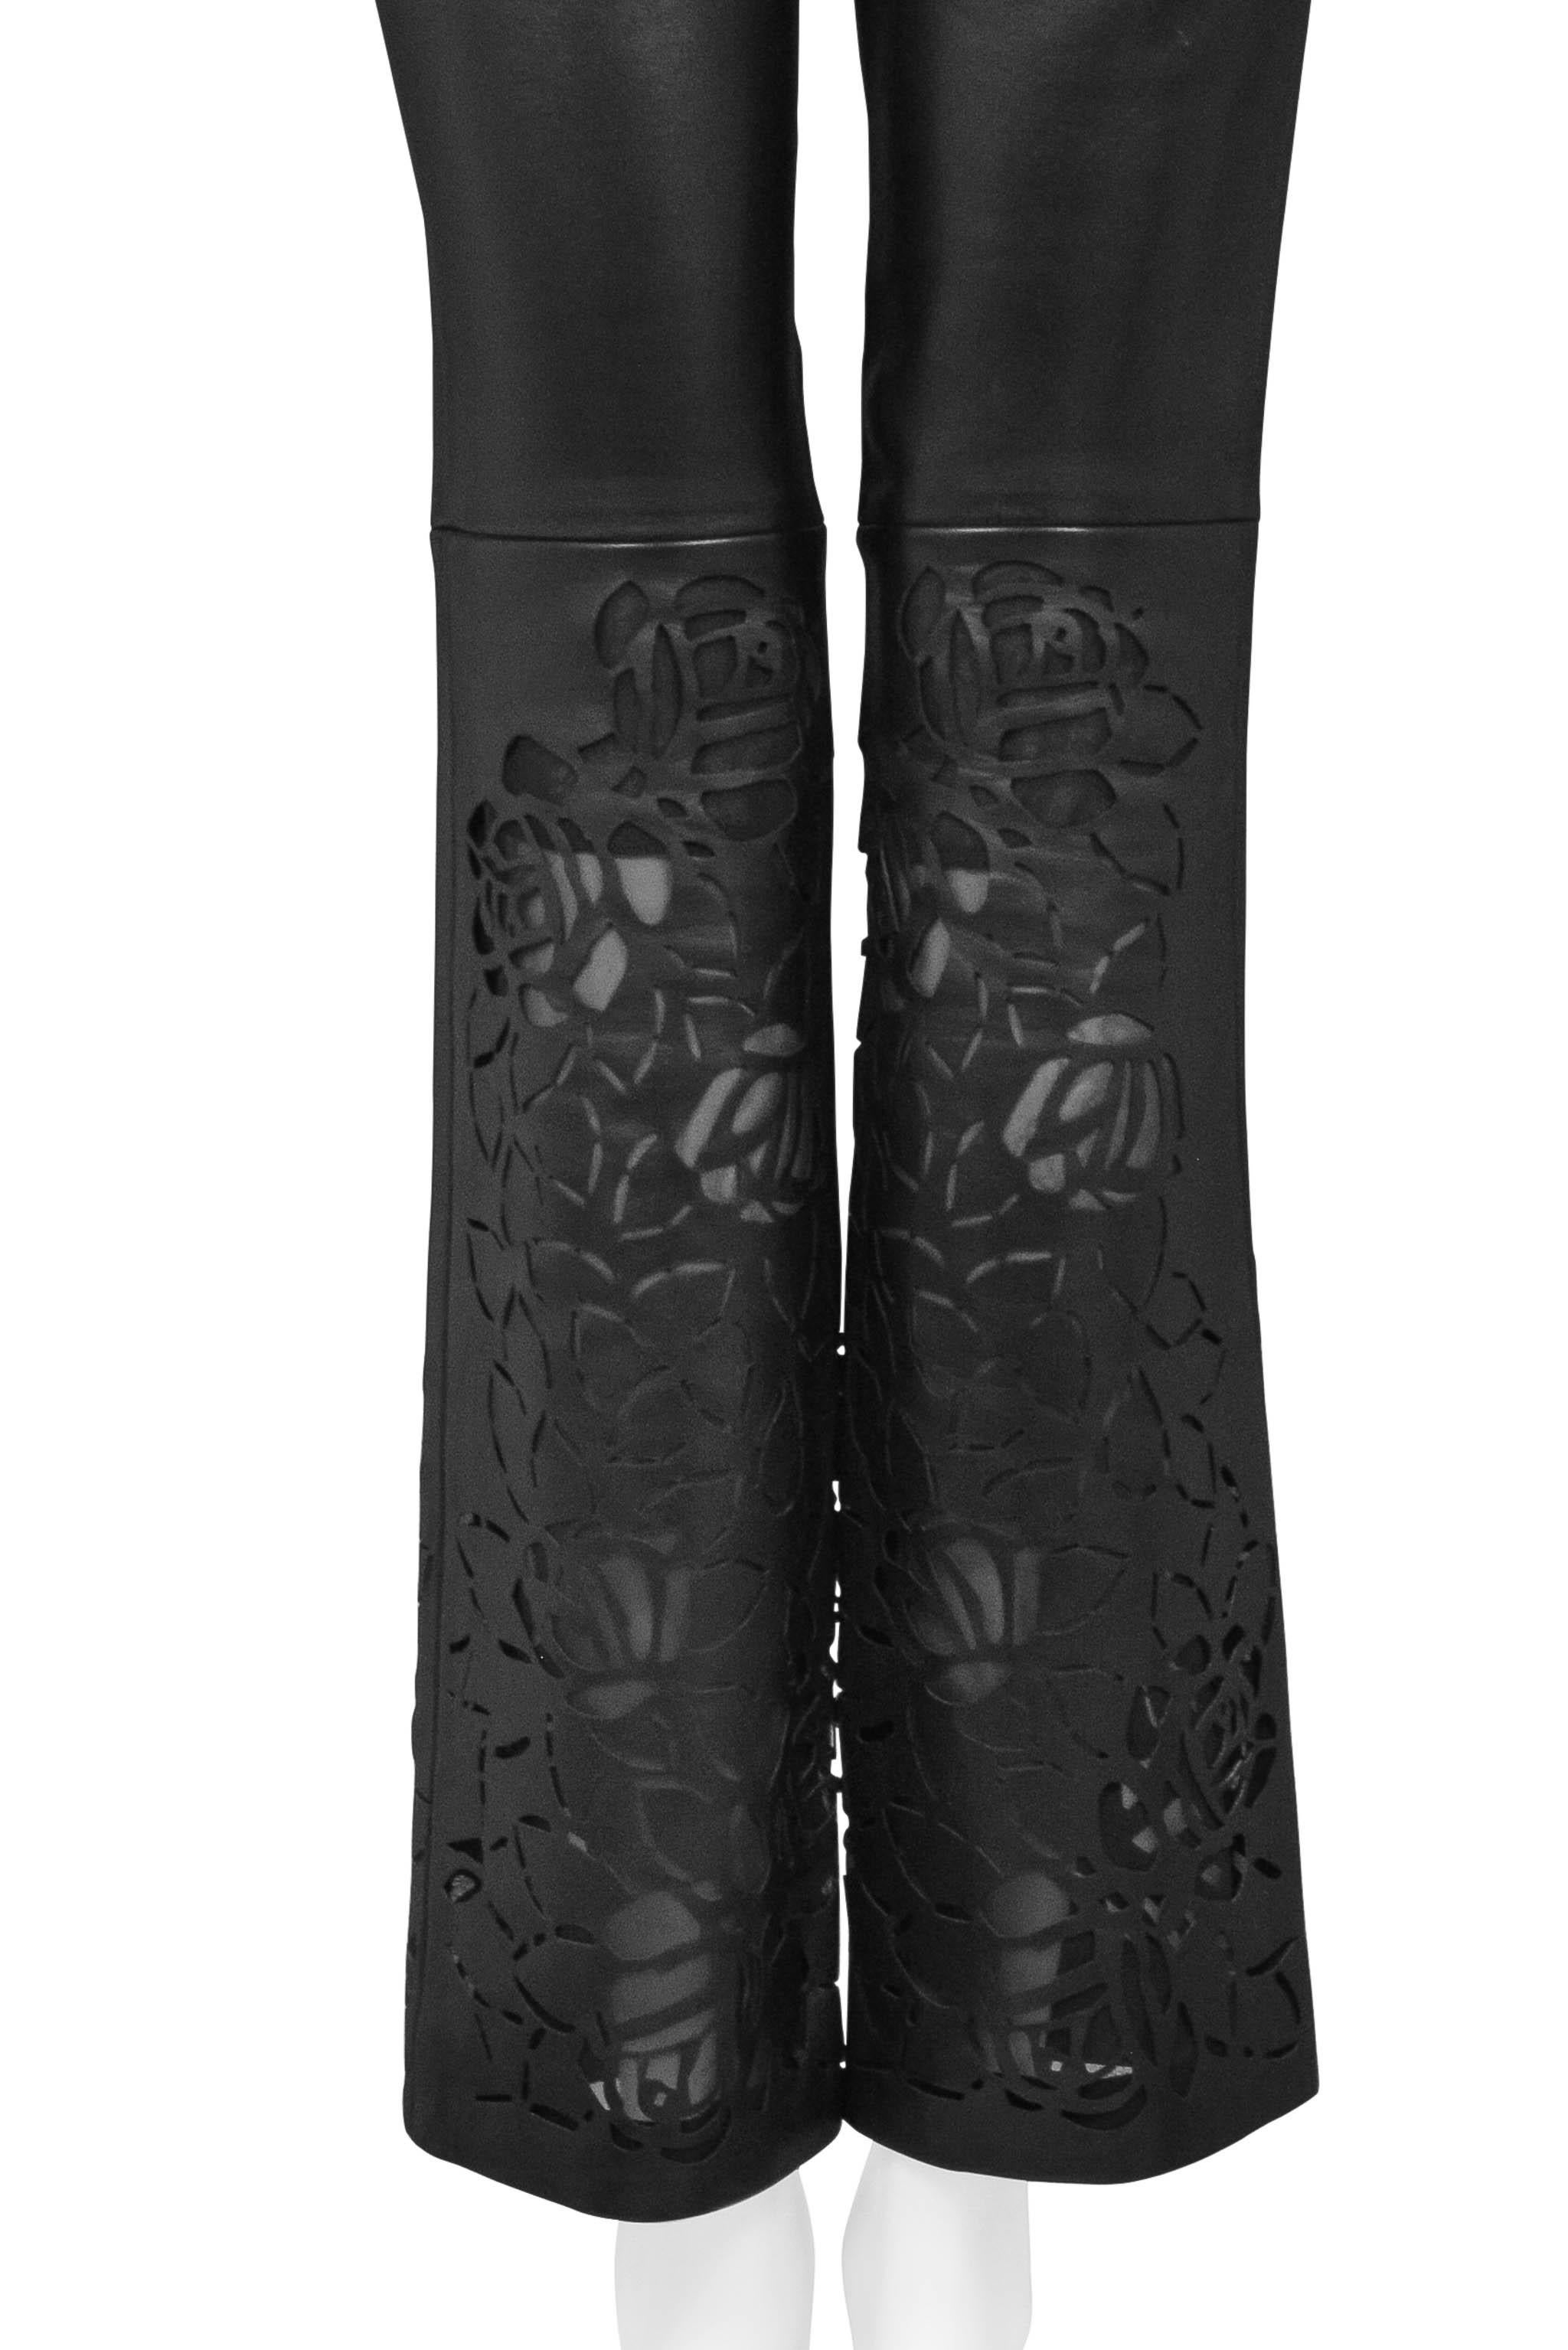 Versace Black Leather Pants With Floral Laser Cutouts For Sale at 1stDibs